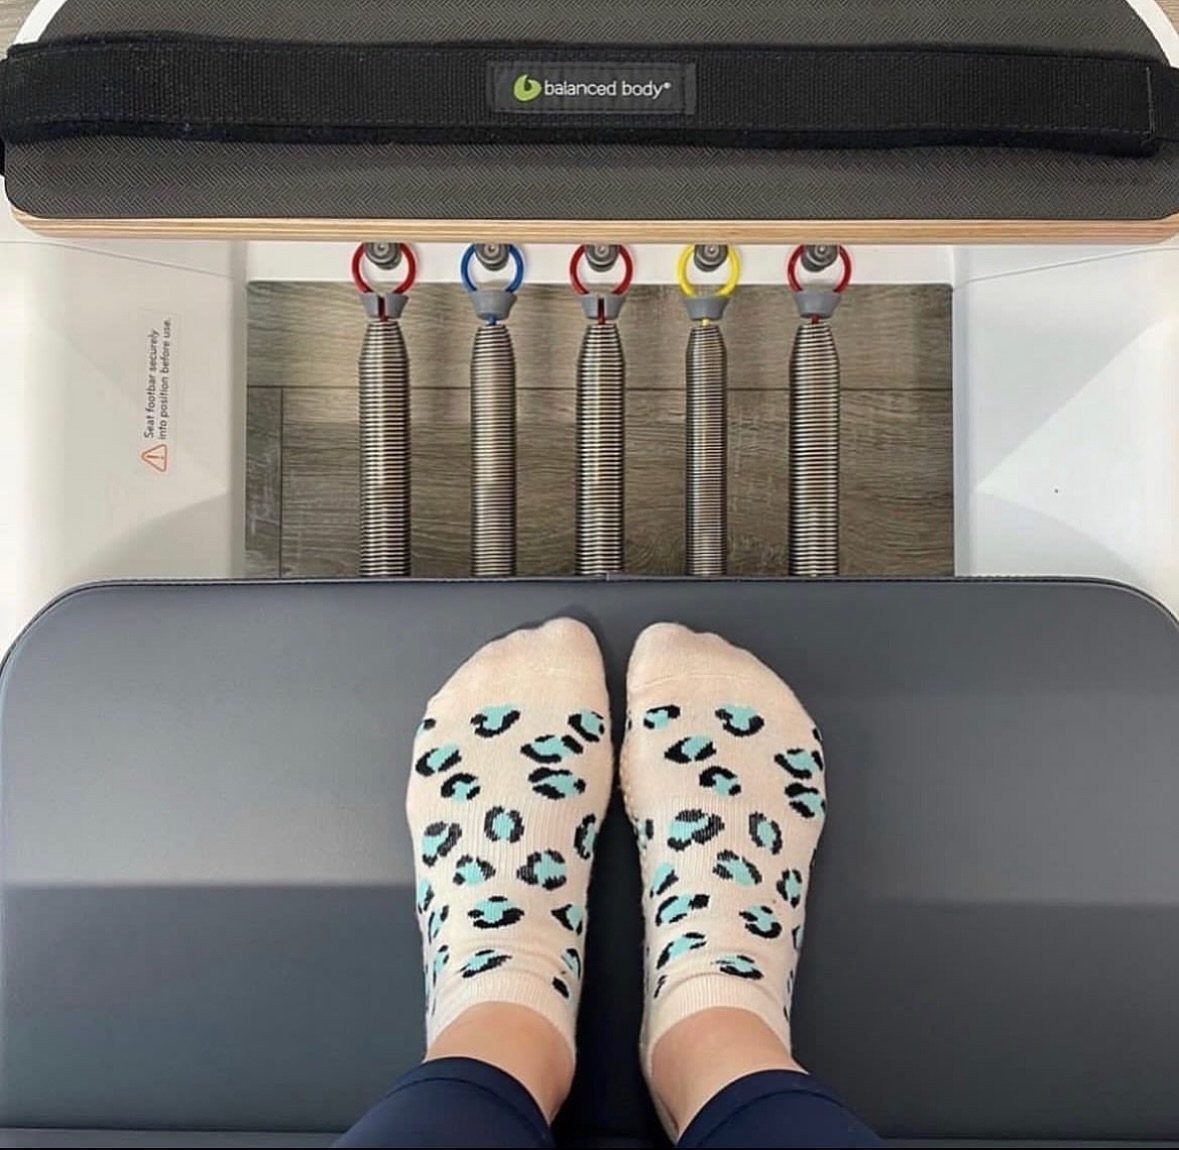 The Reformer Springs ❤️ 💙❤️💛❤️

The springs on the Reformer can be used as both resistance and assistance.

The versatility created by these 5 springs allows people of all abilities and levels to feel challenged and energised.

What do the differen